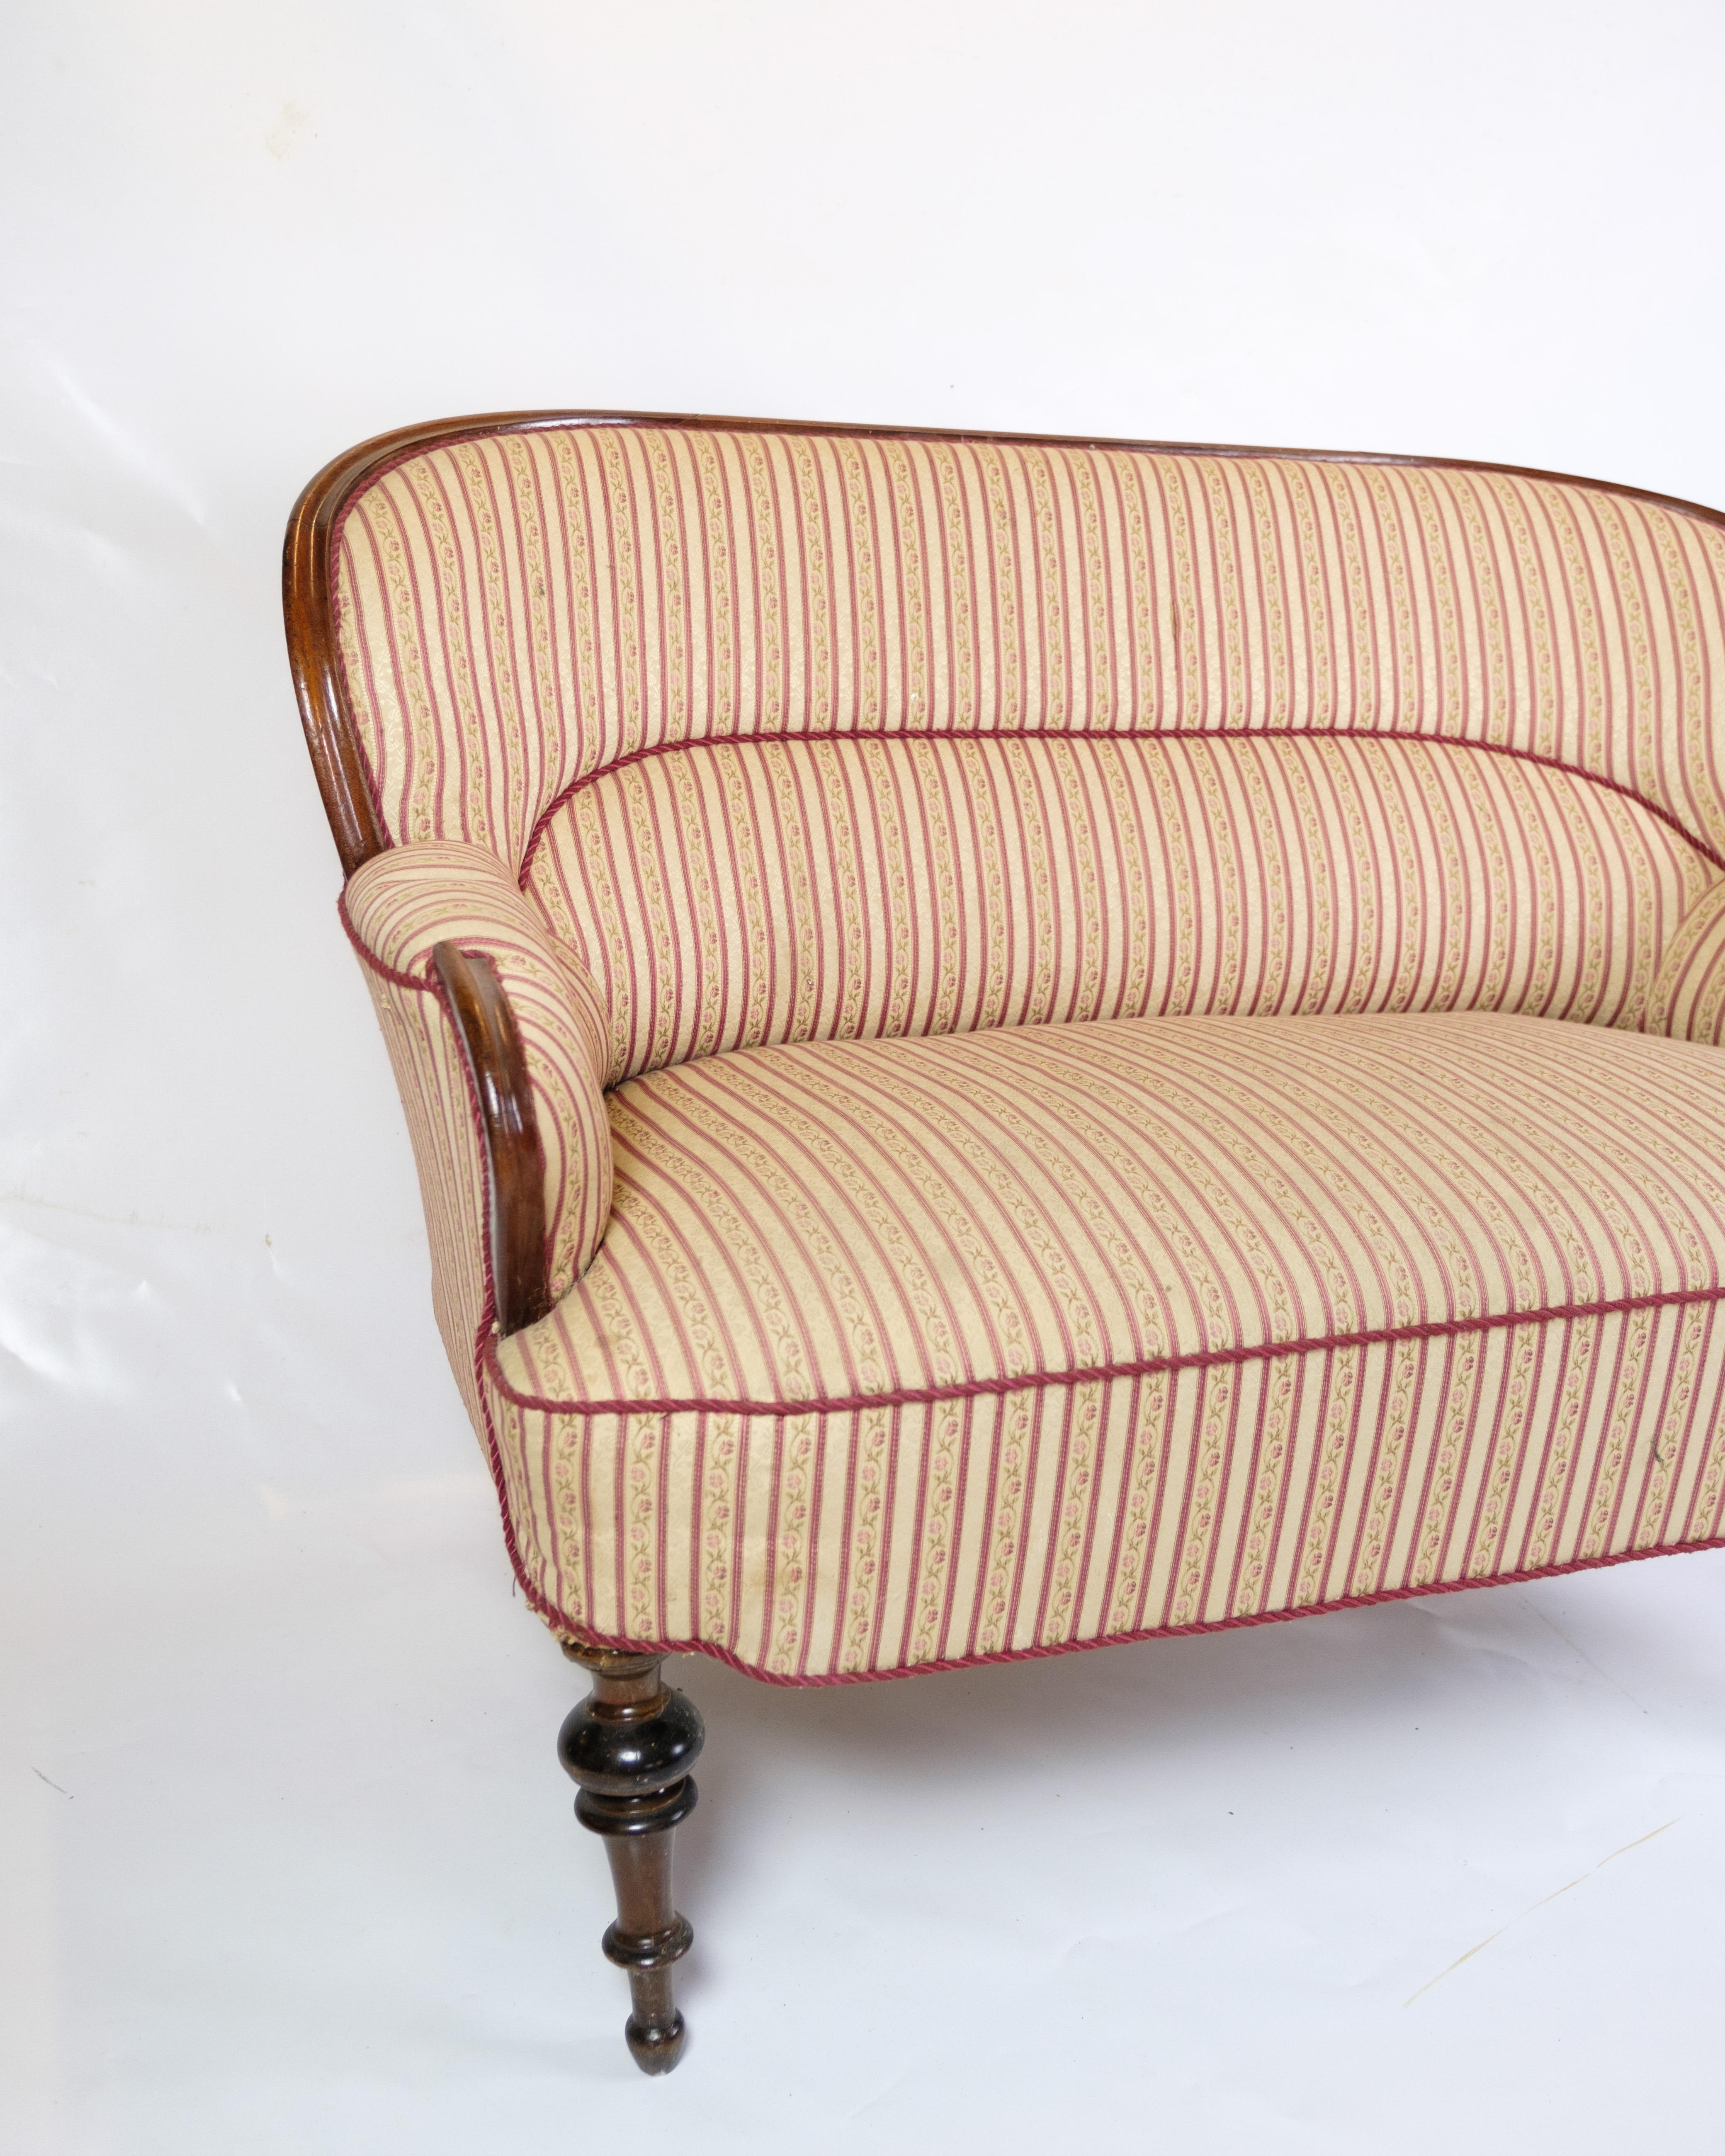 This antique two-seater sofa from approx. 1890 is a fine example of period craftsmanship and elegance. Made of mahogany wood, the sofa exudes a timeless charm and durability. Upholstered in a beautifully patterned fabric, it adds a touch of elegance